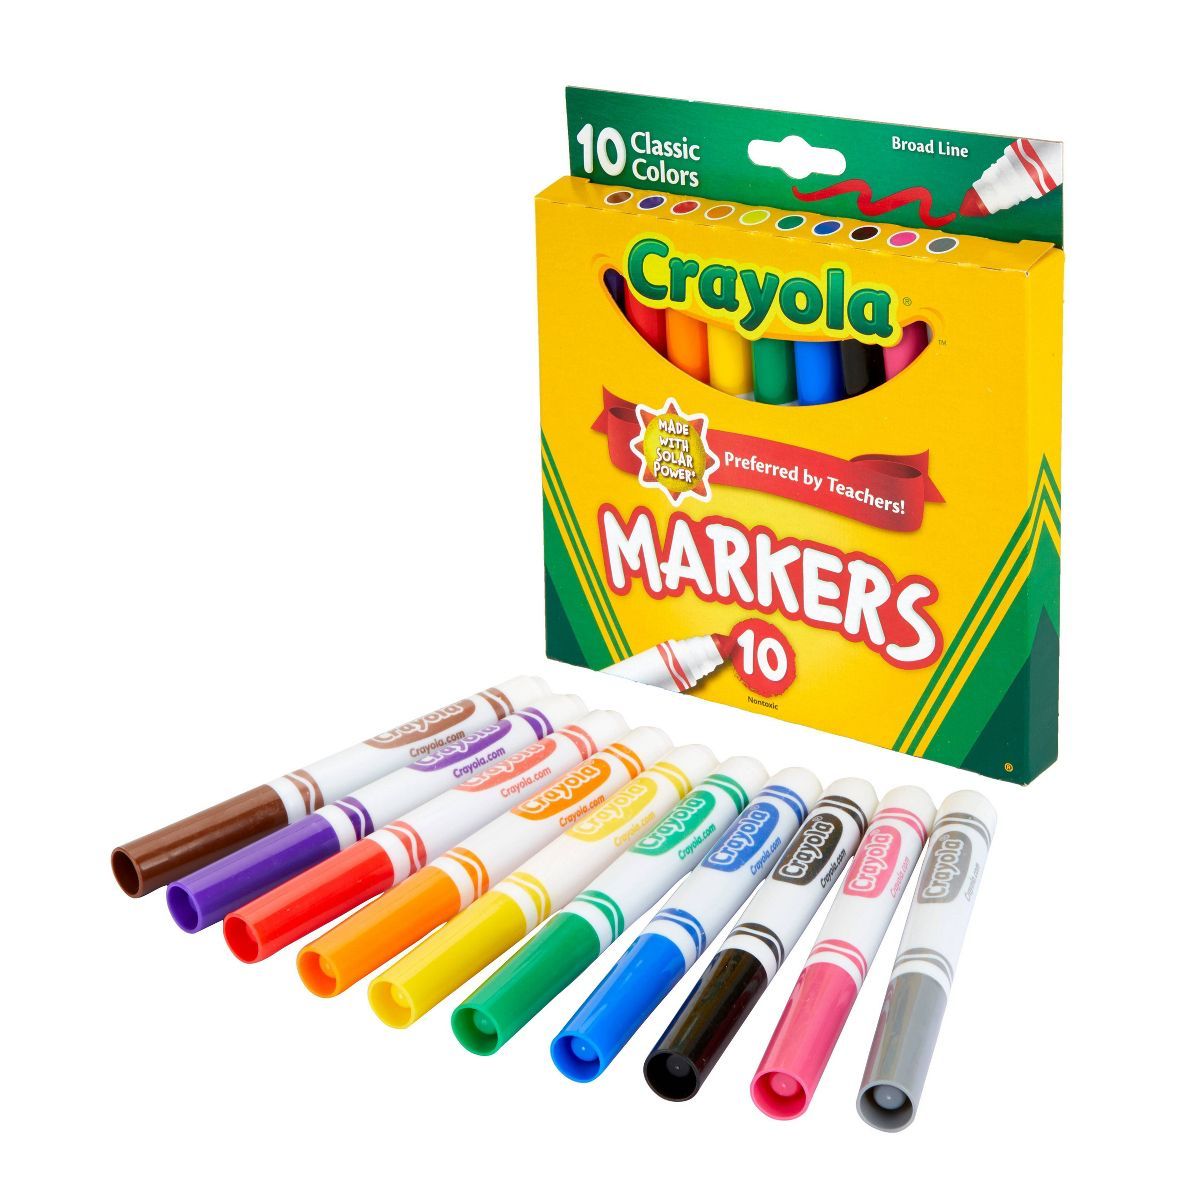 Crayola Markers Broad Line 10ct Classic | Target